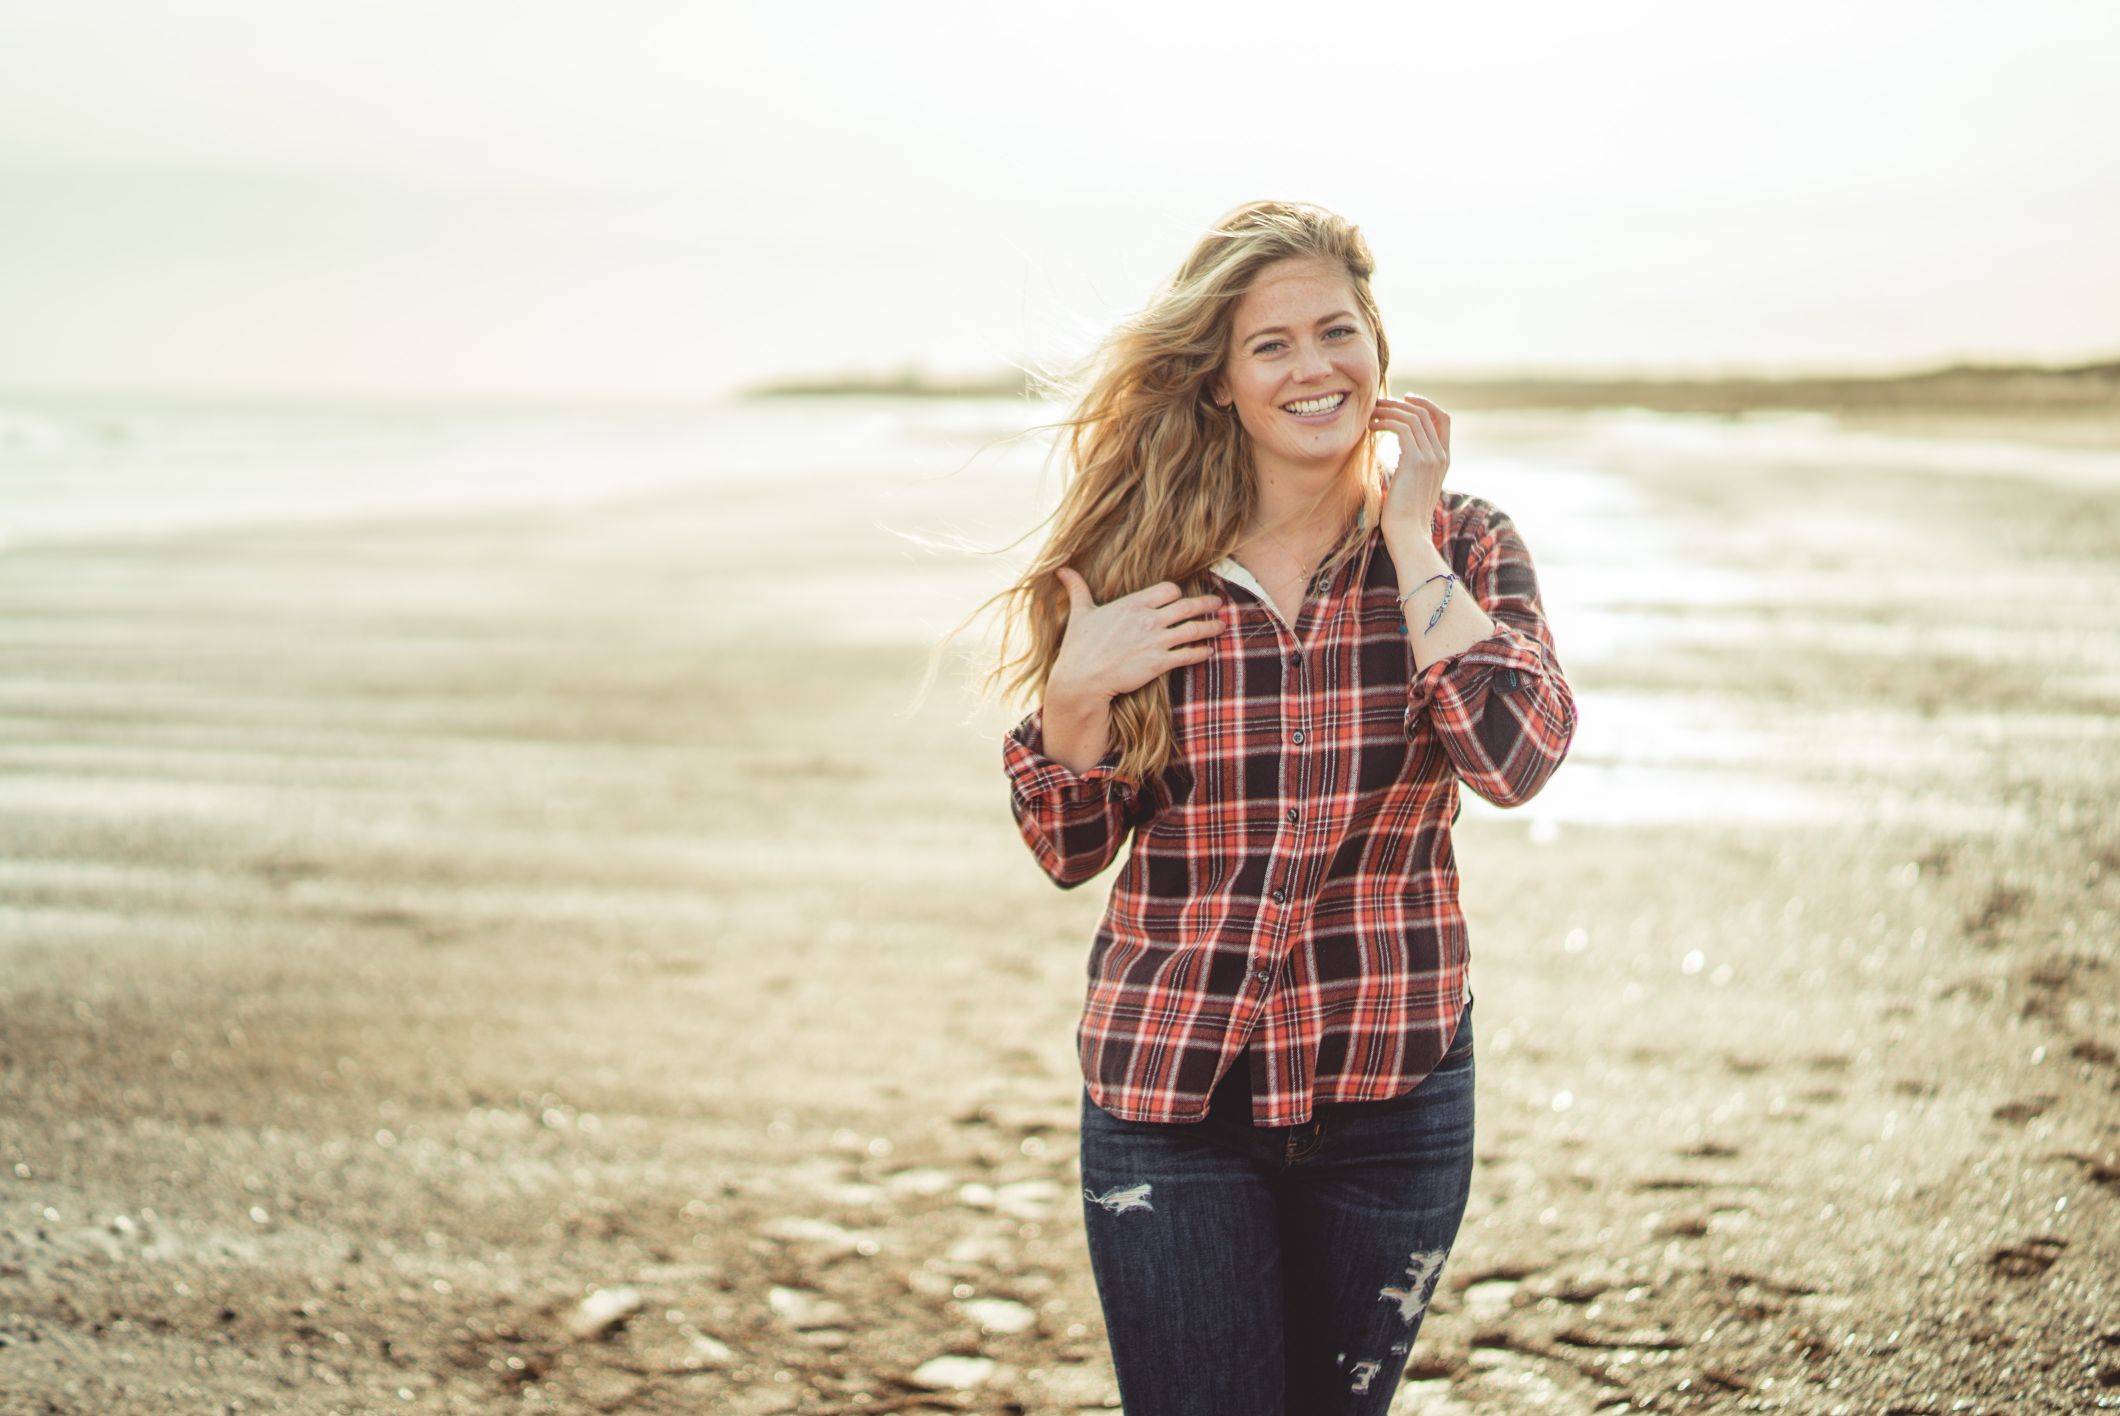 Image of abi walking along beach with wavy hair